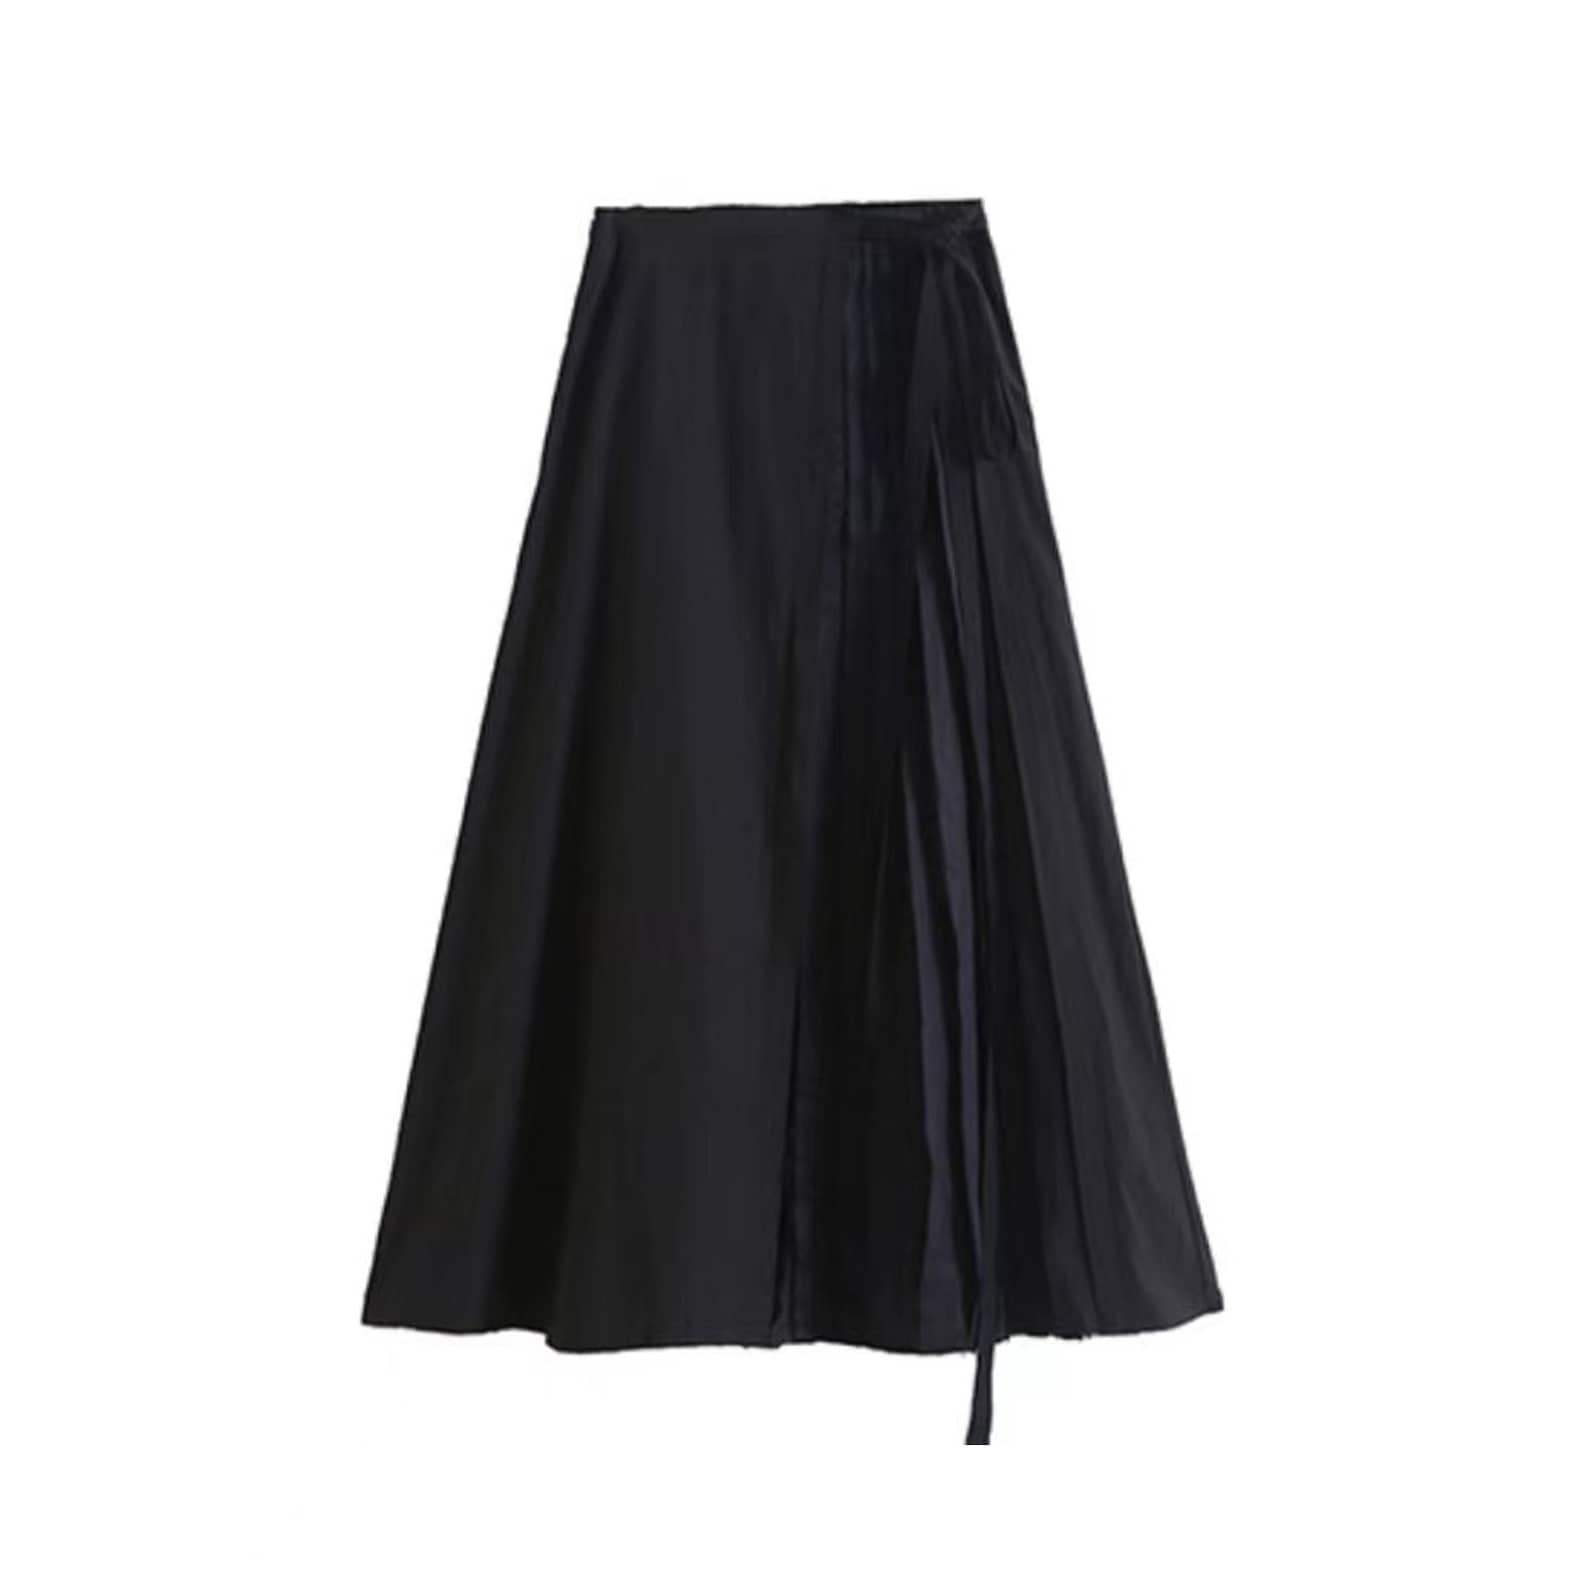 Black Cotton Linen Pleated Skirt Maxi Skirt With Drawstring - Etsy